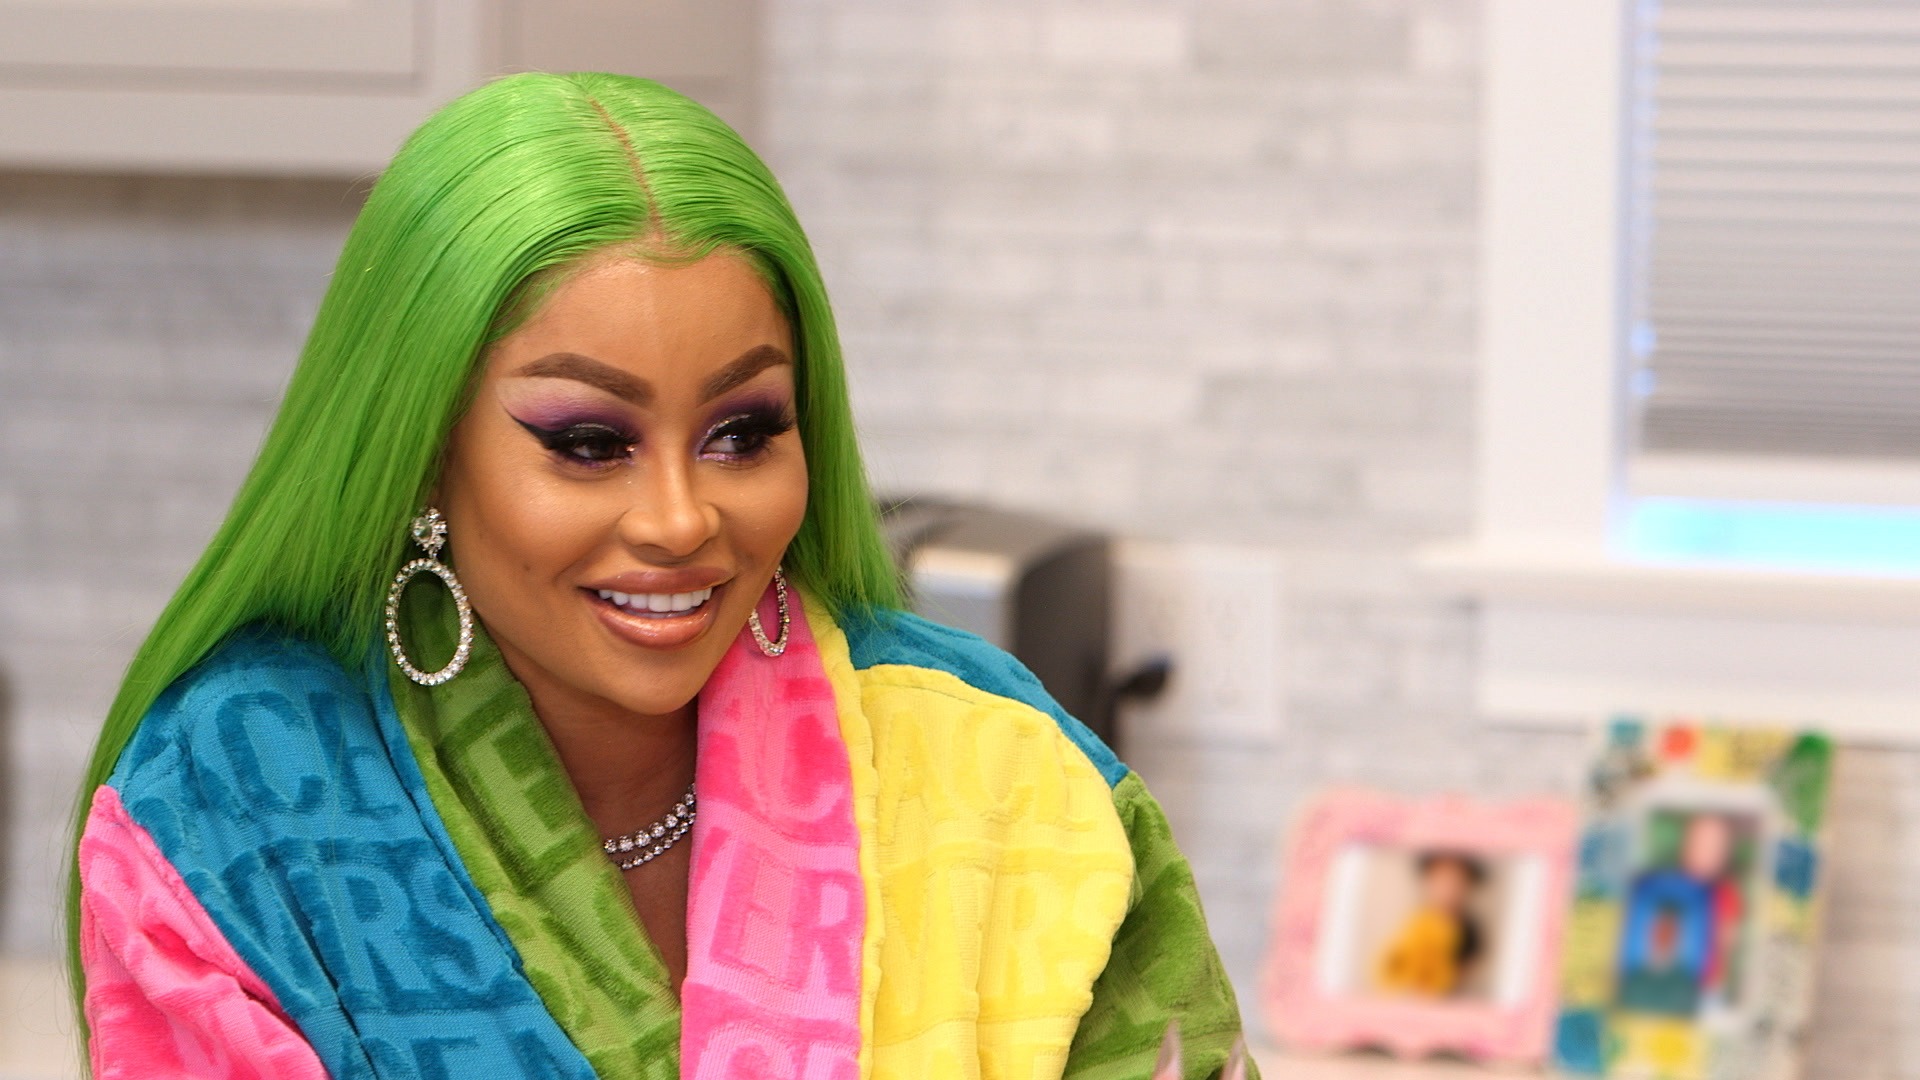 Watch The Real Blac Chyna Season 1 Episode 10 | Stream Full Episodes